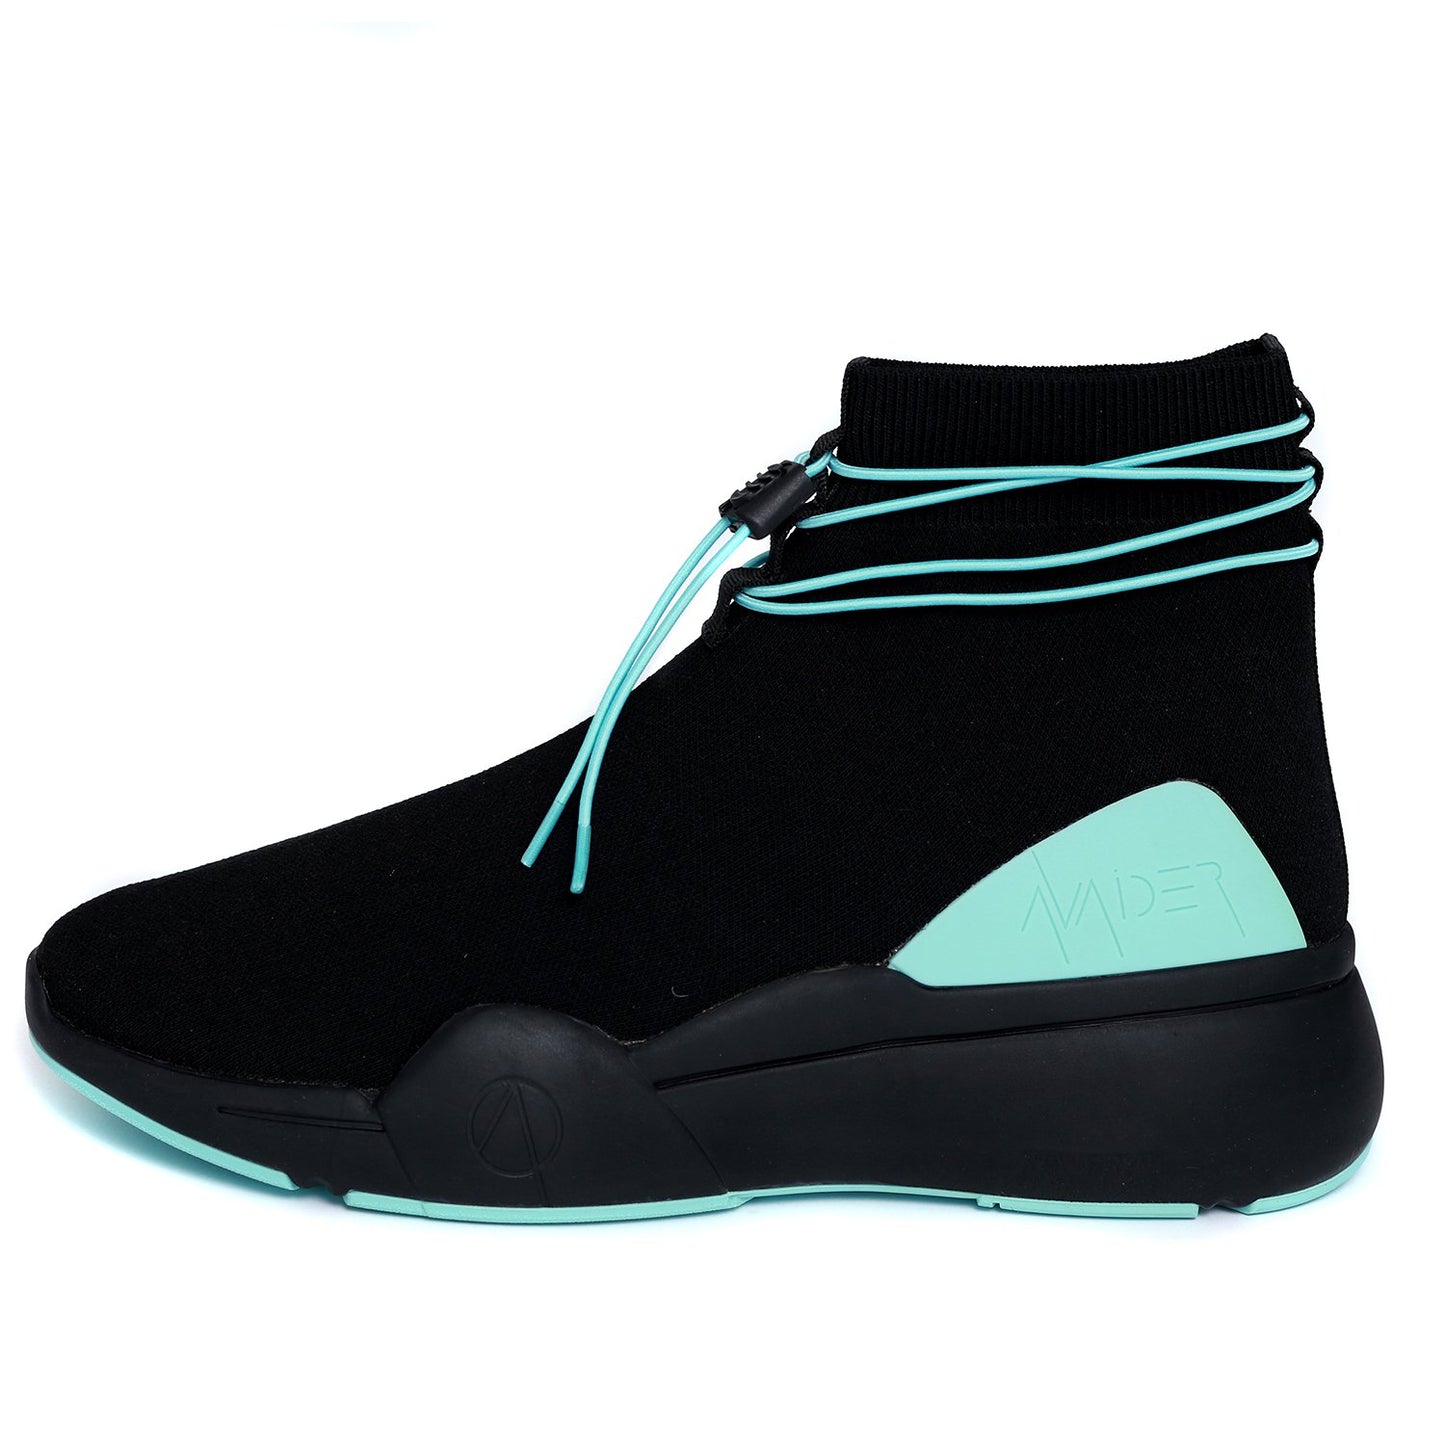 ELLIPSIS SOCK TRAINER IN BLACK AND TEAL